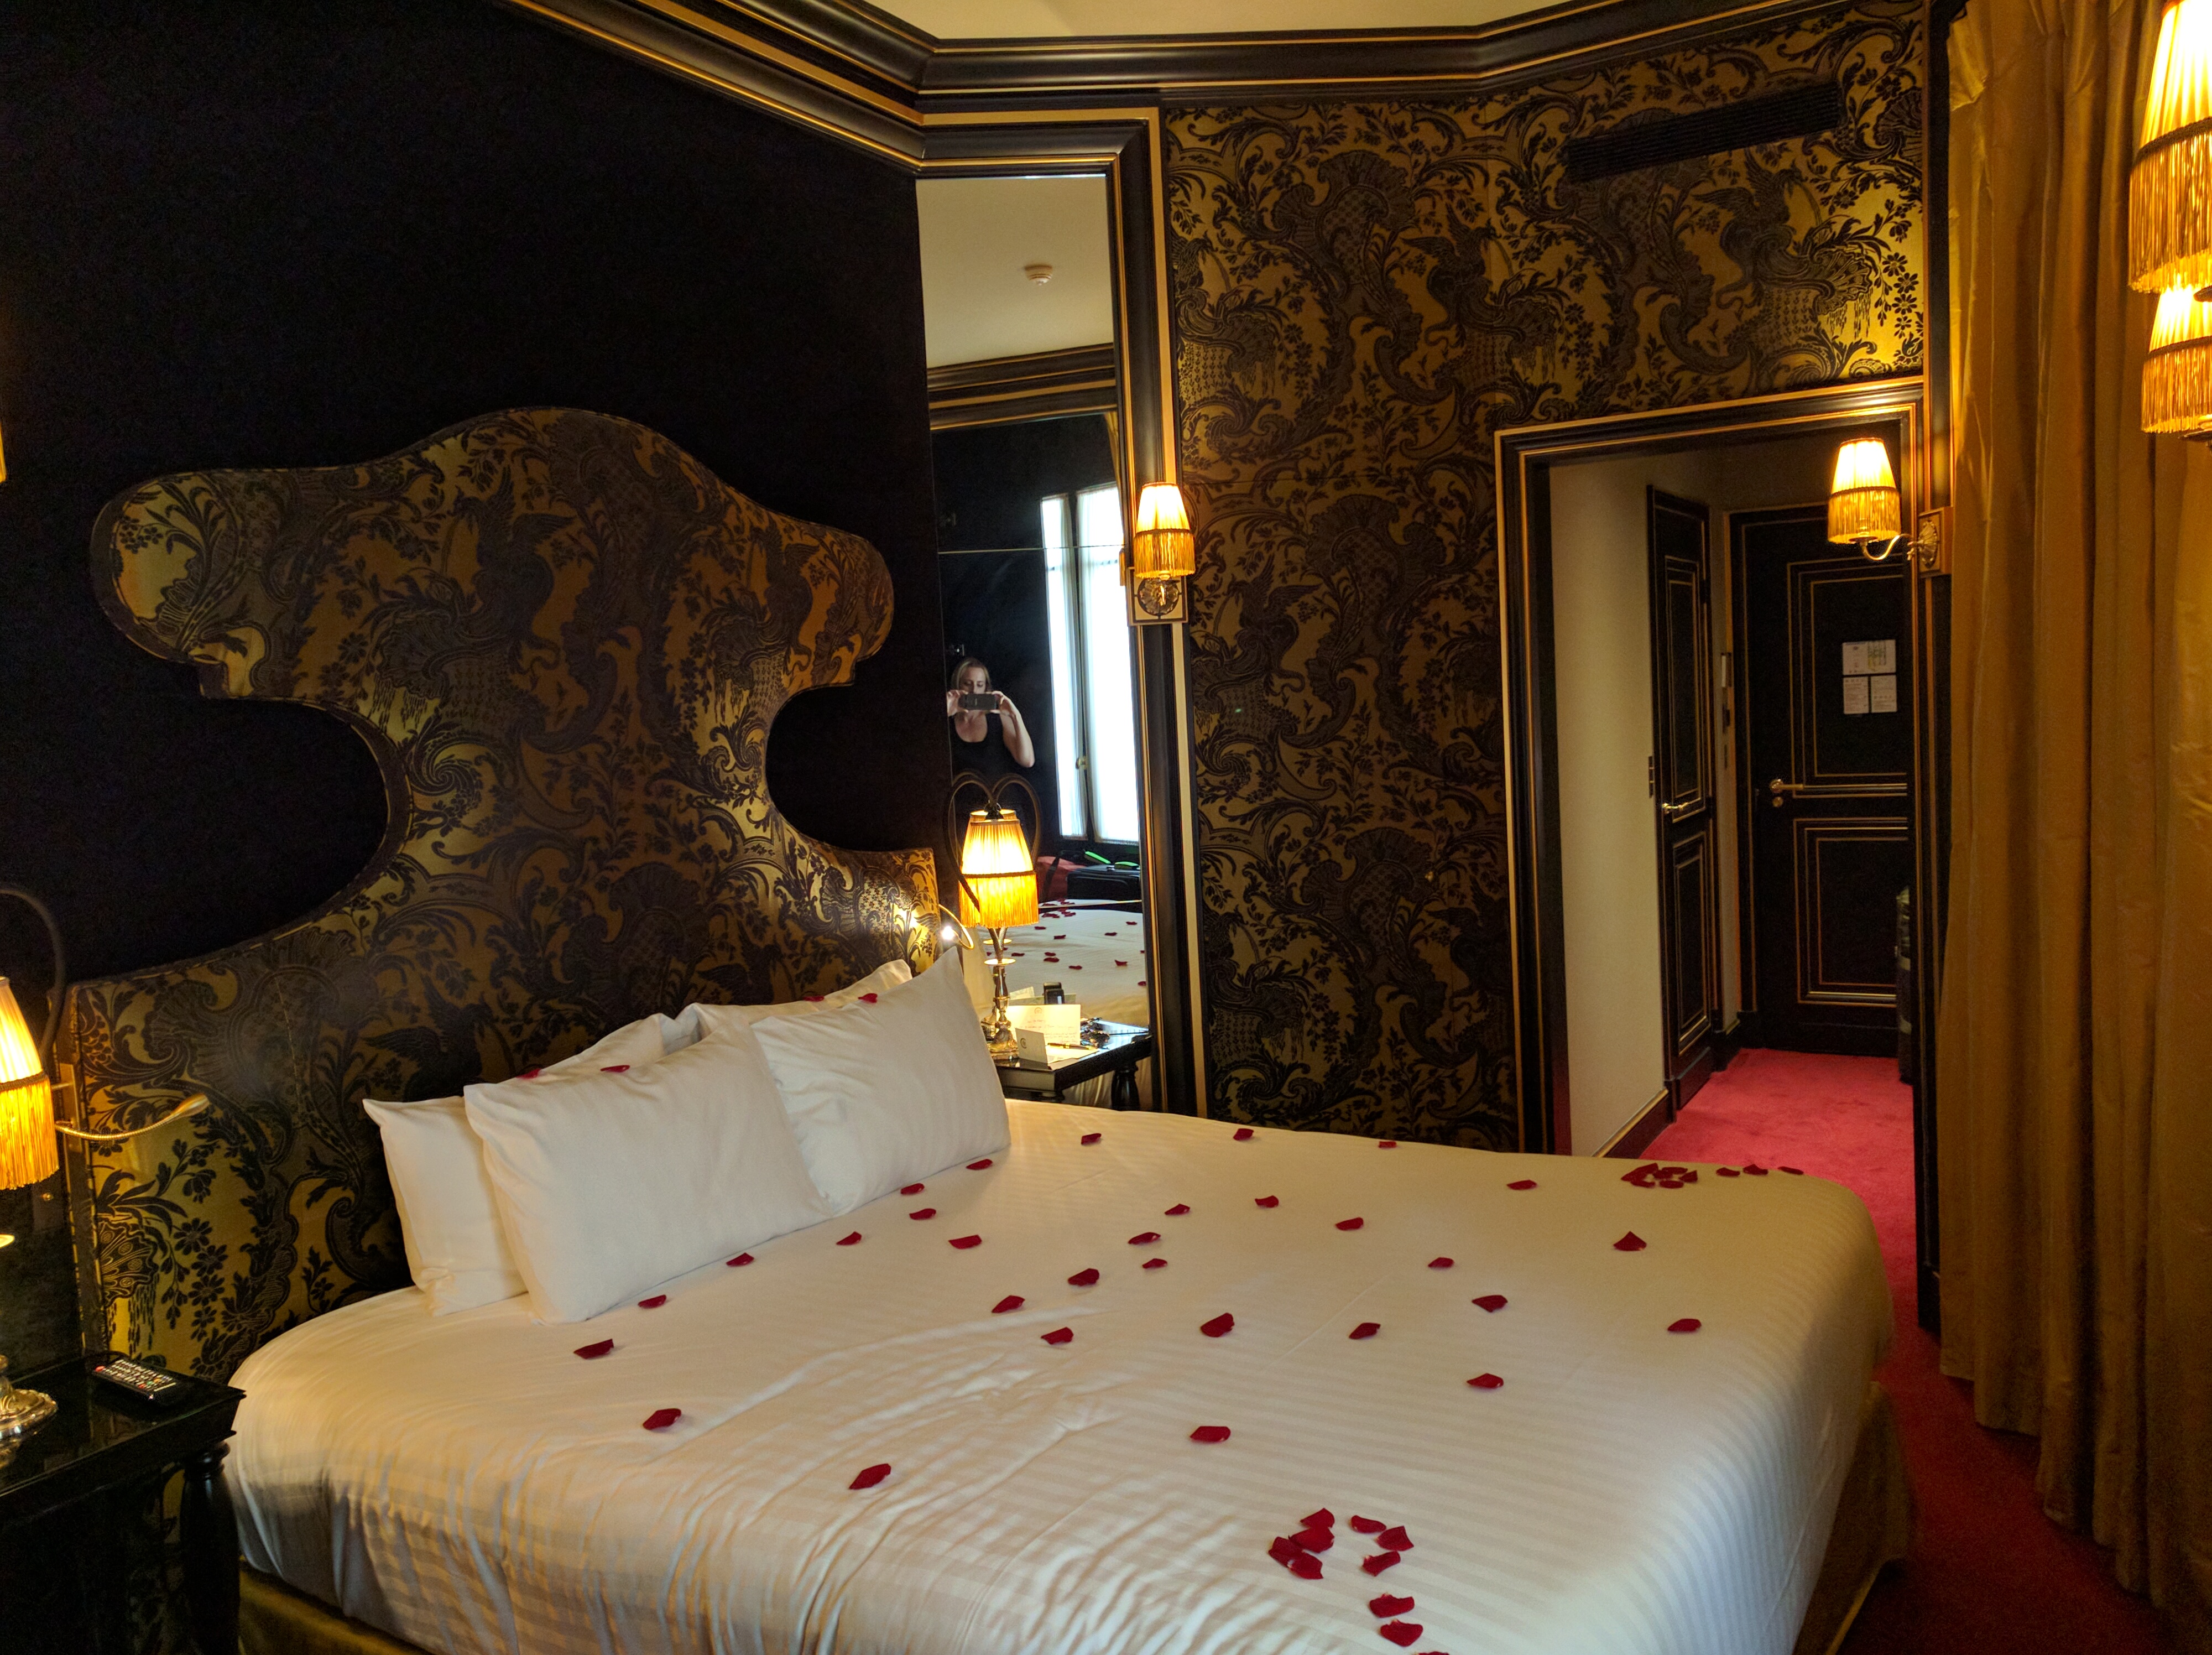 Honeymoon mode with the rose petals here! 